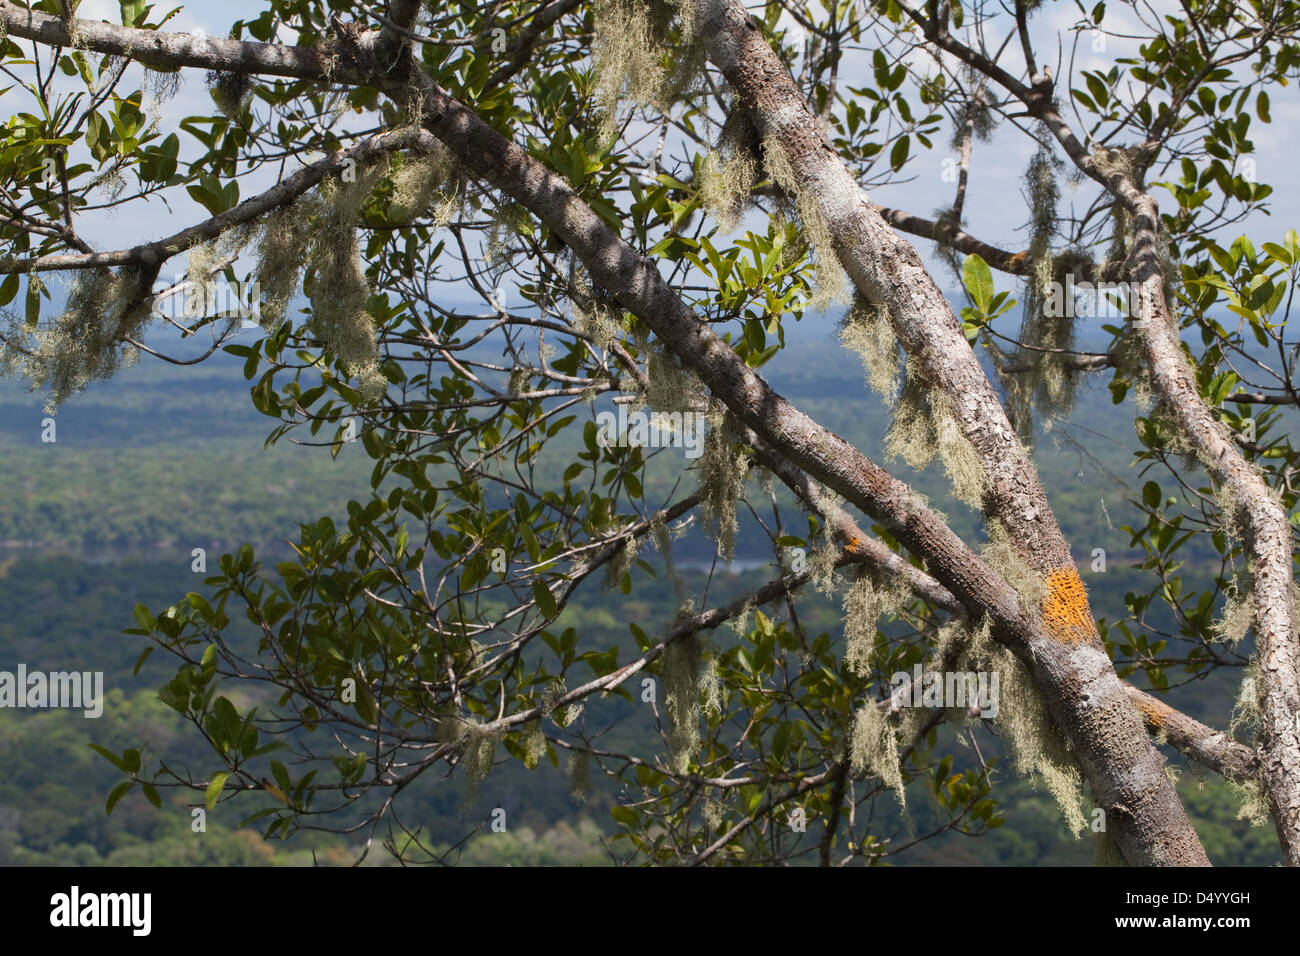 Lichens and mosses growing on tree branches, 300m. or 950 ft. on the summit of Turtle Mountain. Iwokrama forest below. GUYANA. SOUTH AMERICA. Stock Photo